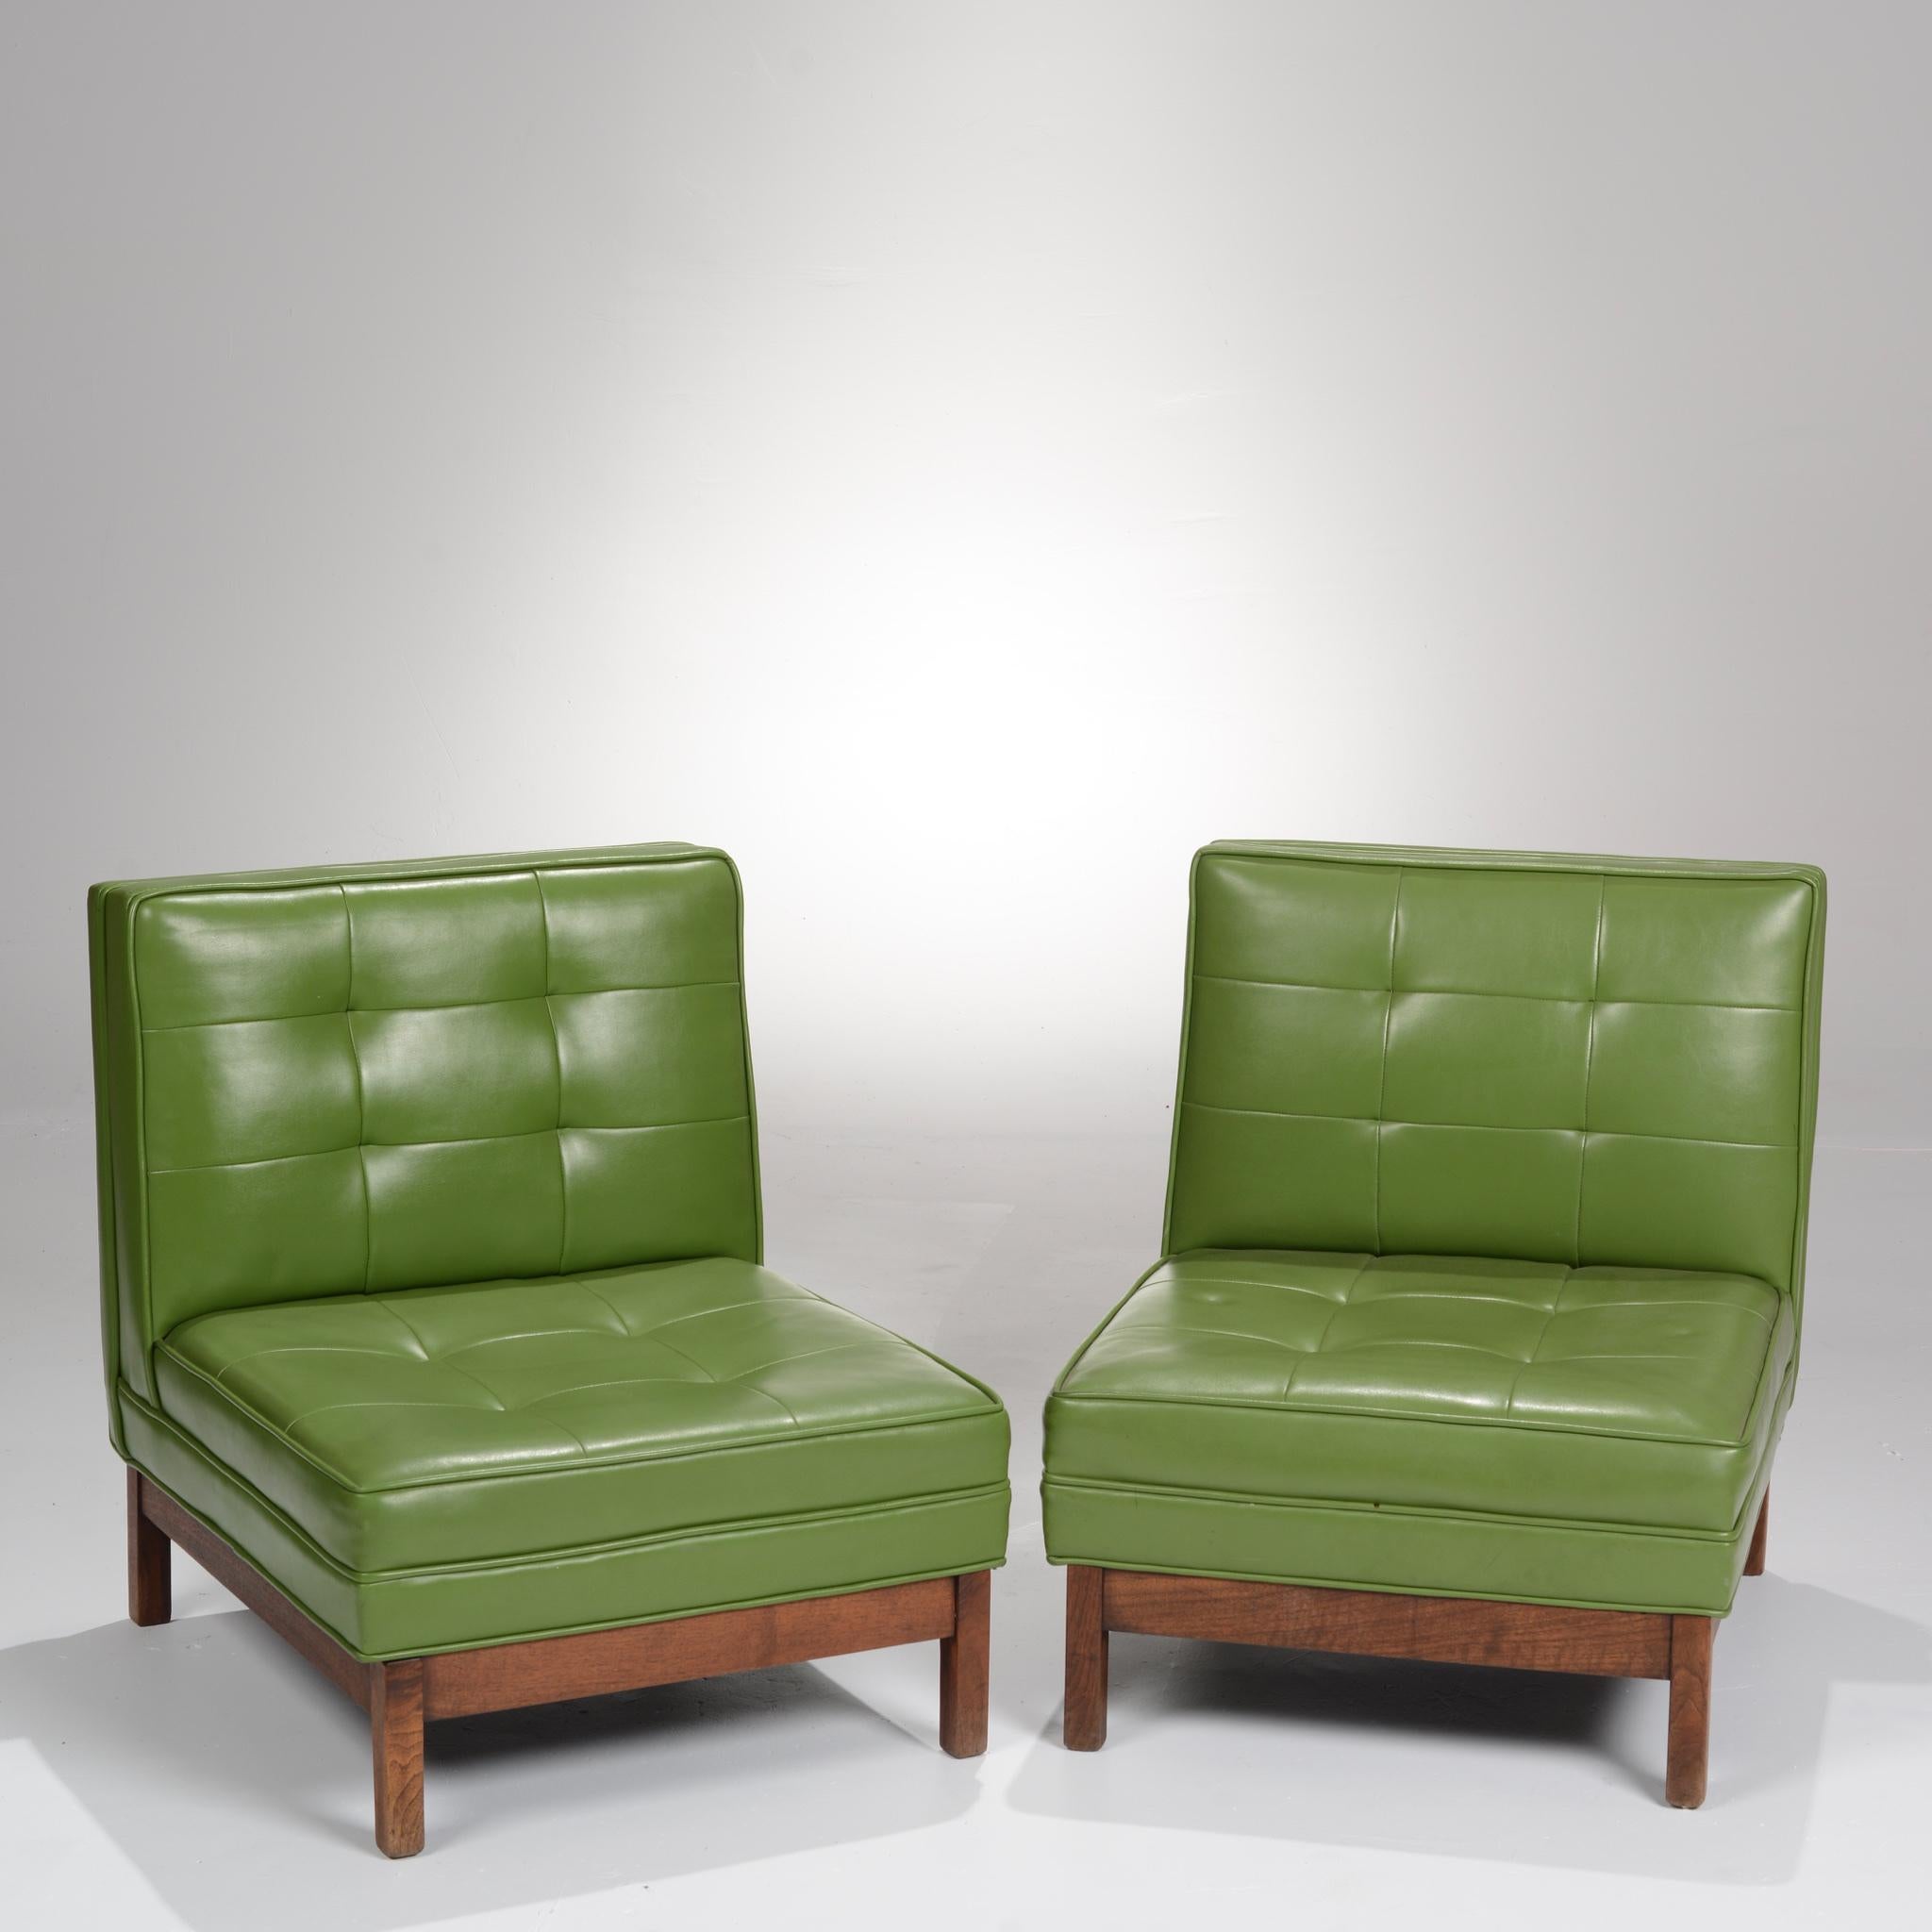 Pair of green vinyl and walnut slipper chairs in the style of Edward Wormley. These chairs are on display in our Los Angeles Arts District showroom, open 5 days a week.
 